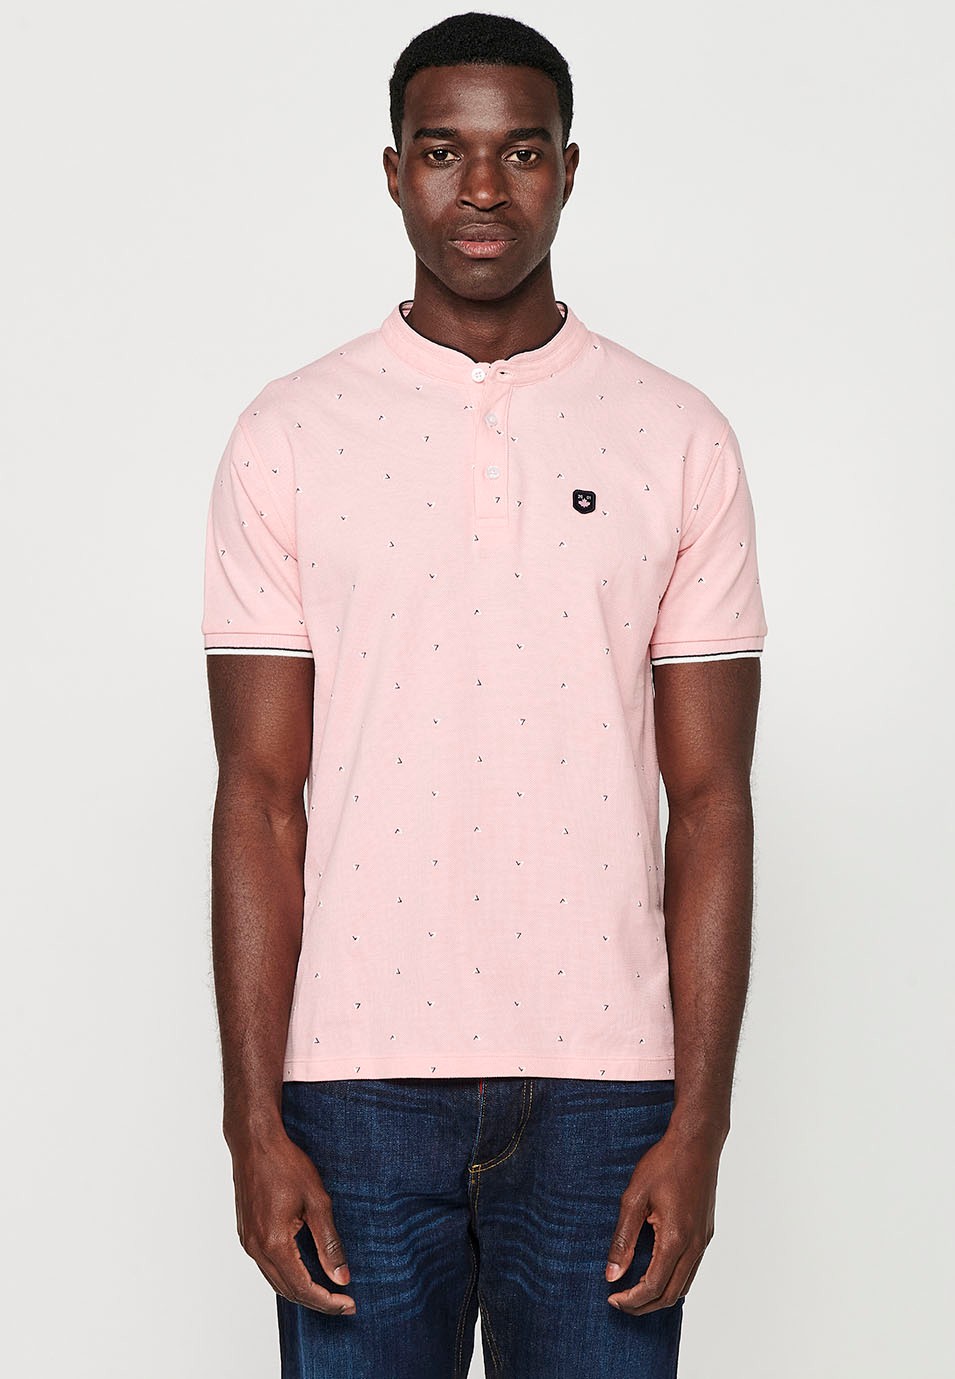 Short-sleeved Cotton Polo with Round Neck with buttoned opening and Finished with Side Cuts in Pink for Men 4